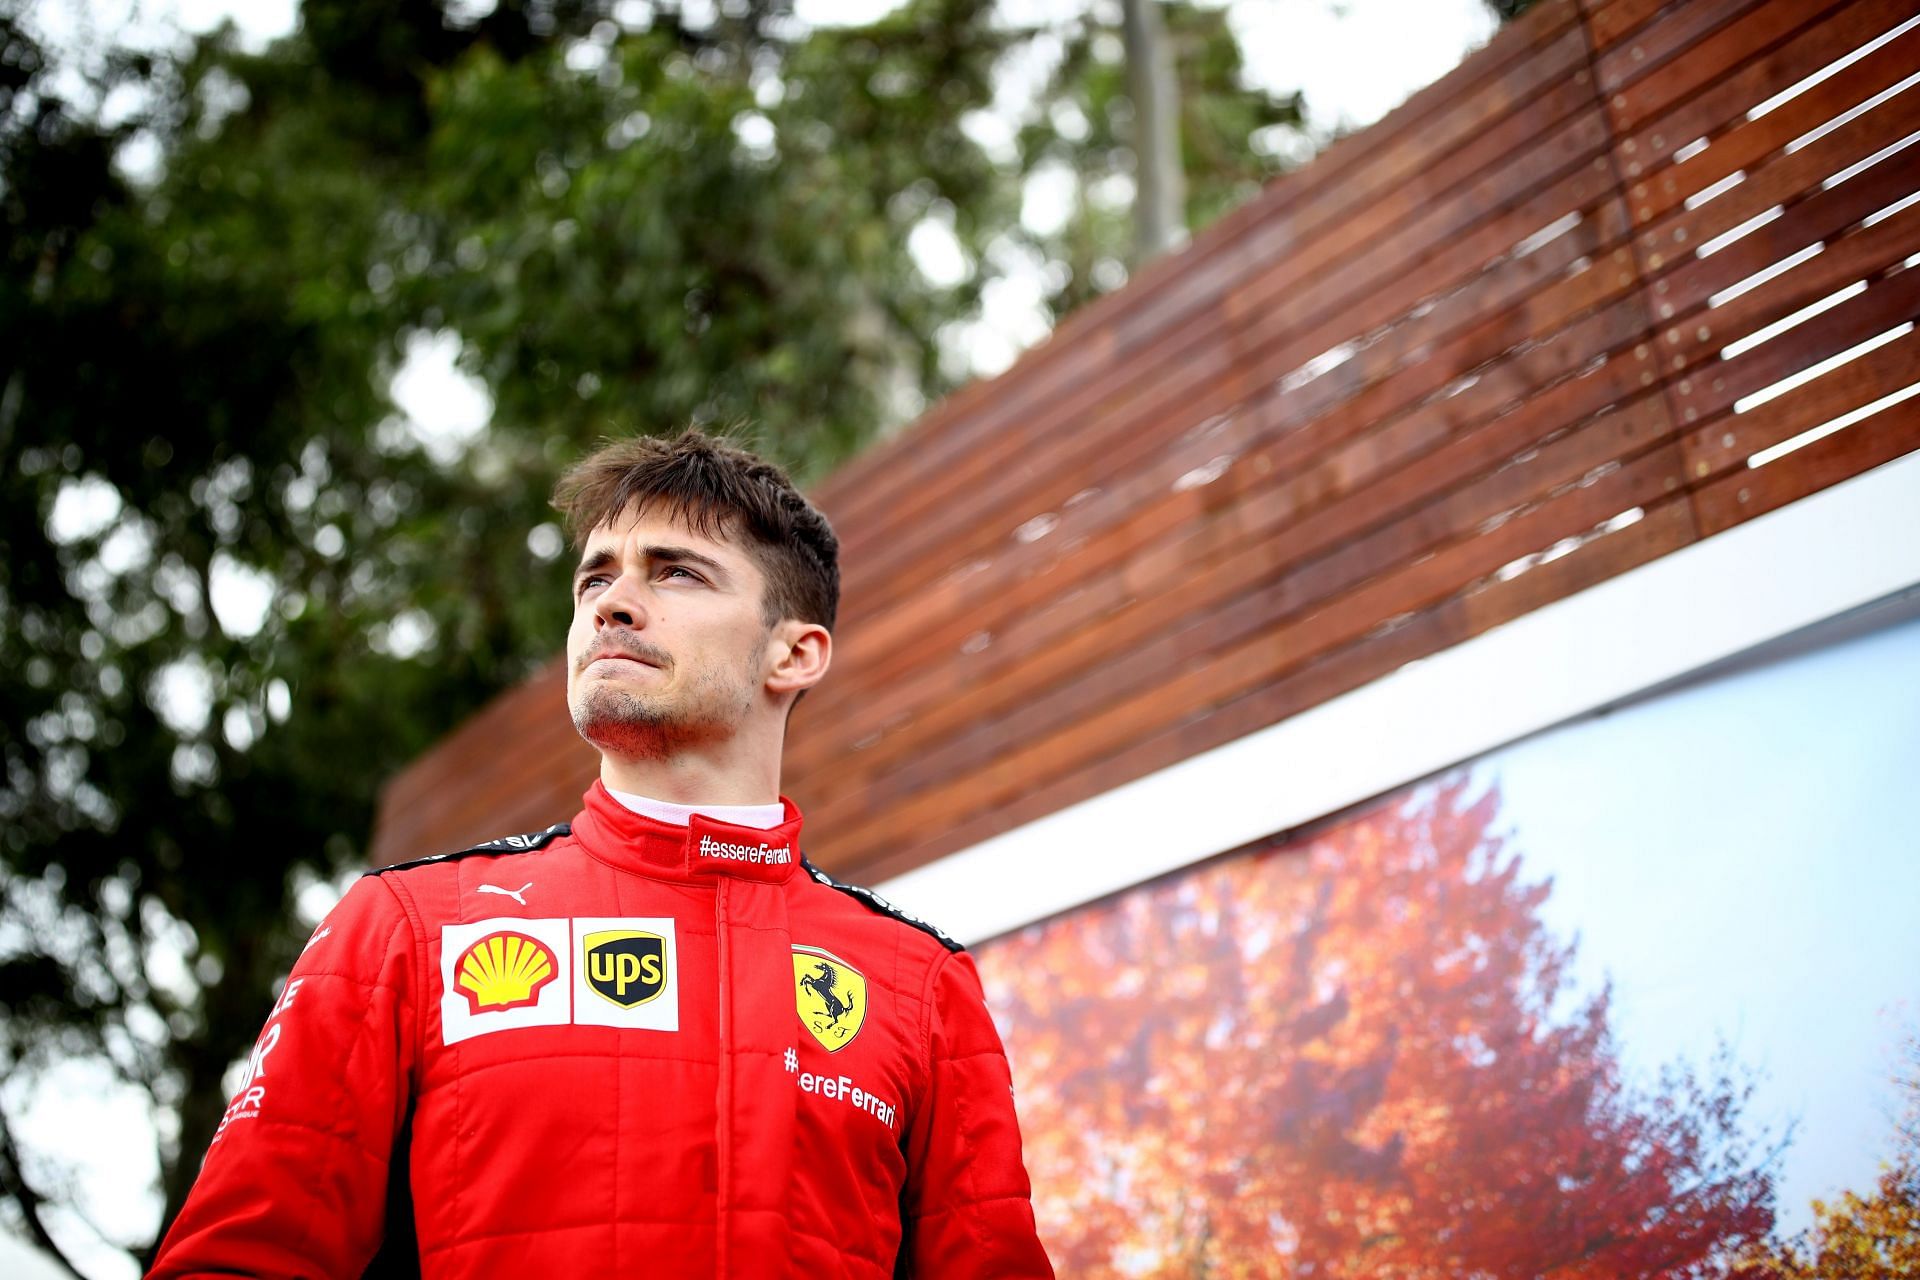 Charles Leclerc remains optimistic about his chances of beating Max Verstappen to the 2022 F1 title